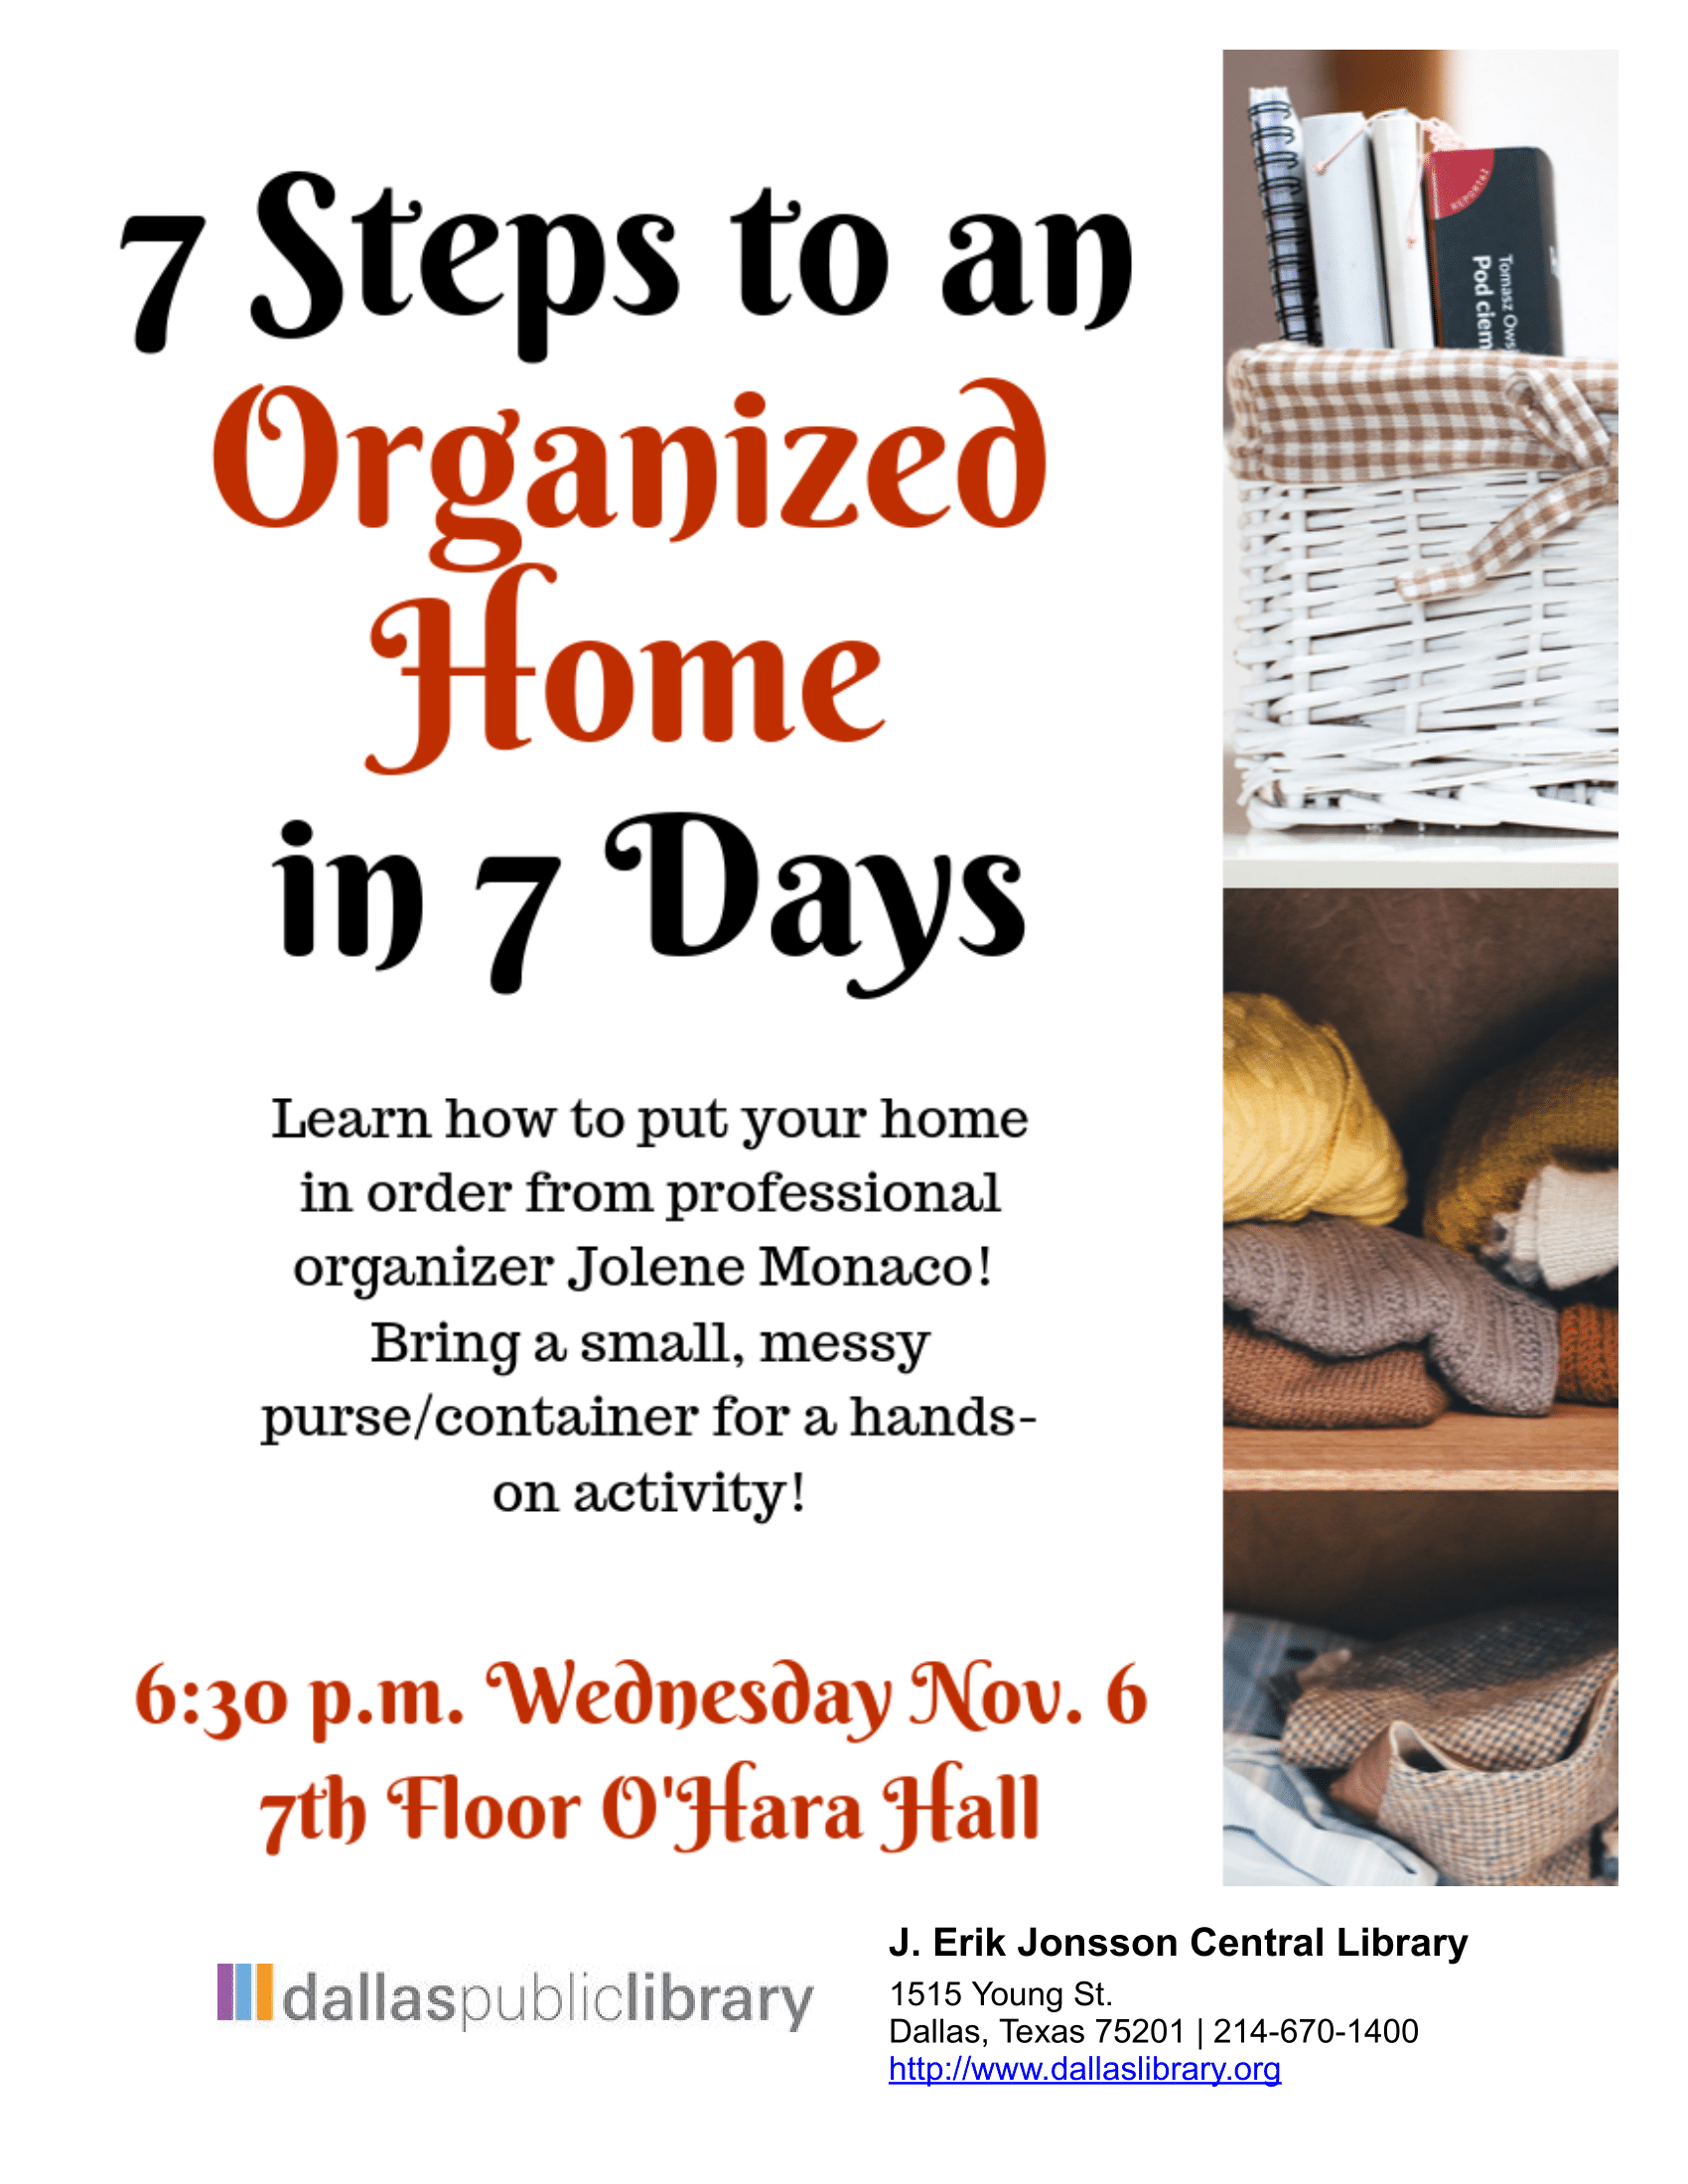 7 Steps to an Organized Home Presented by professional organizer Jolene Monaco. 6:30 p.m. Wednesday Nov. 6 in the 7th Floor O'Hara Hall.